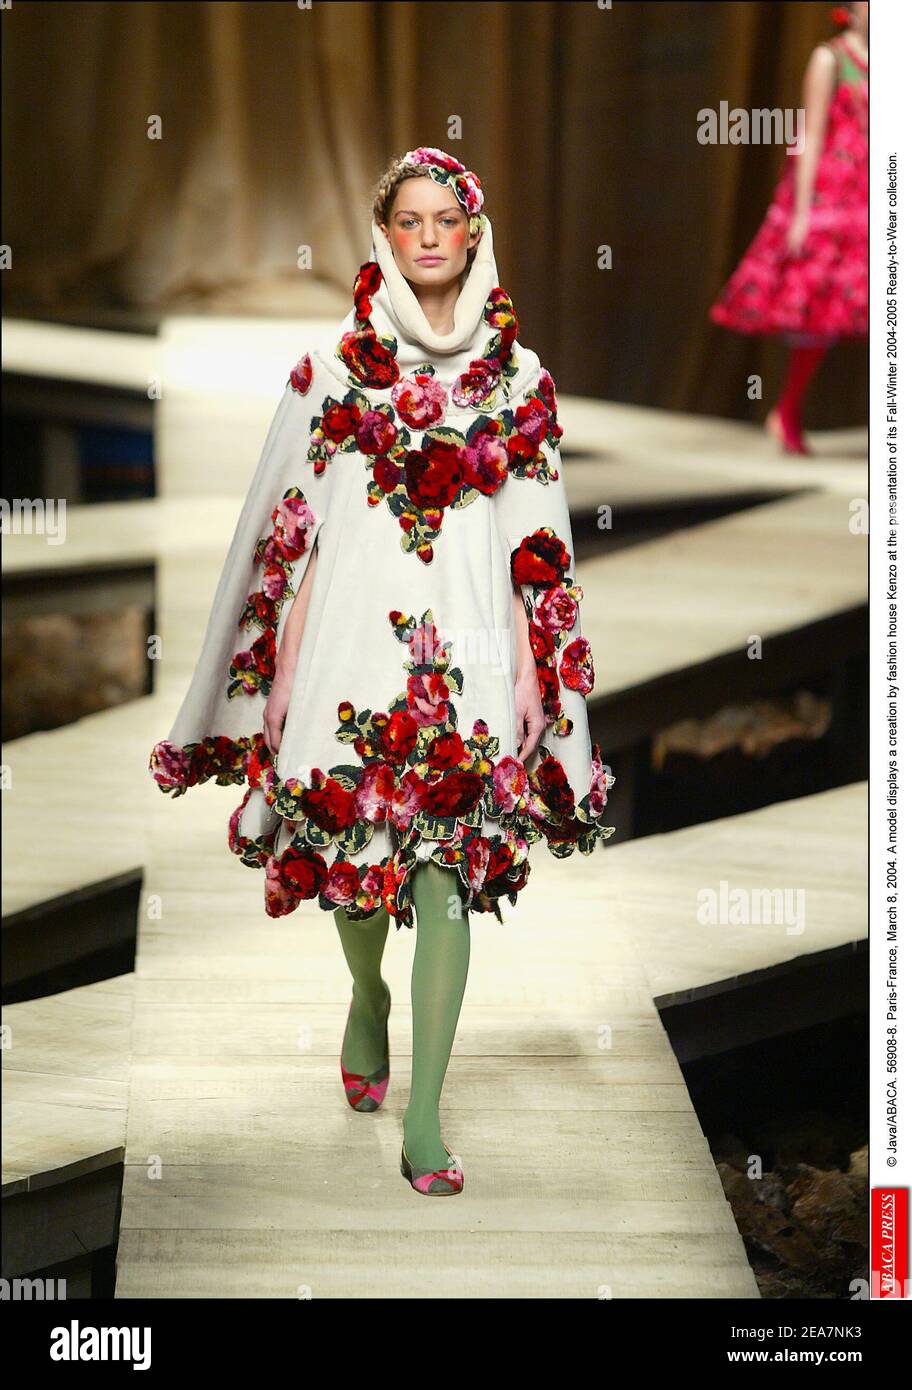 © Java/ABACA. 56908-8. Paris-France, March 8, 2004. A model displays a creation by fashion house Kenzo at the presentation of its Fall-Winter 2004-2005 Ready-to-Wear collection. Stock Photo